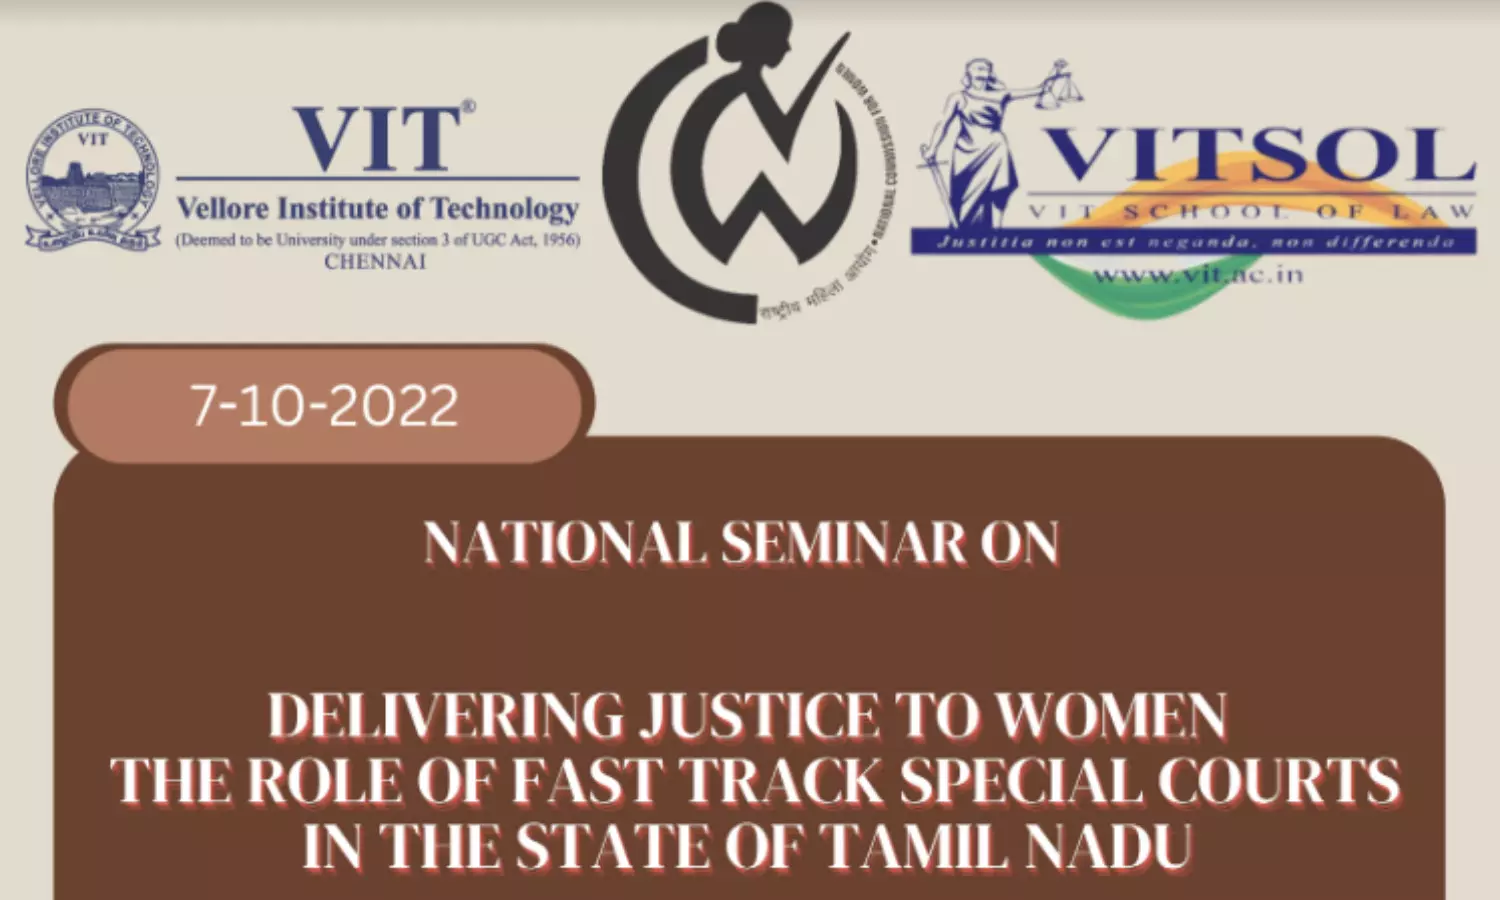 National Seminar on Delivering Justice to Women | The Role of Fast track special courts in the state of Tamil Nadu | 7th October, 2022